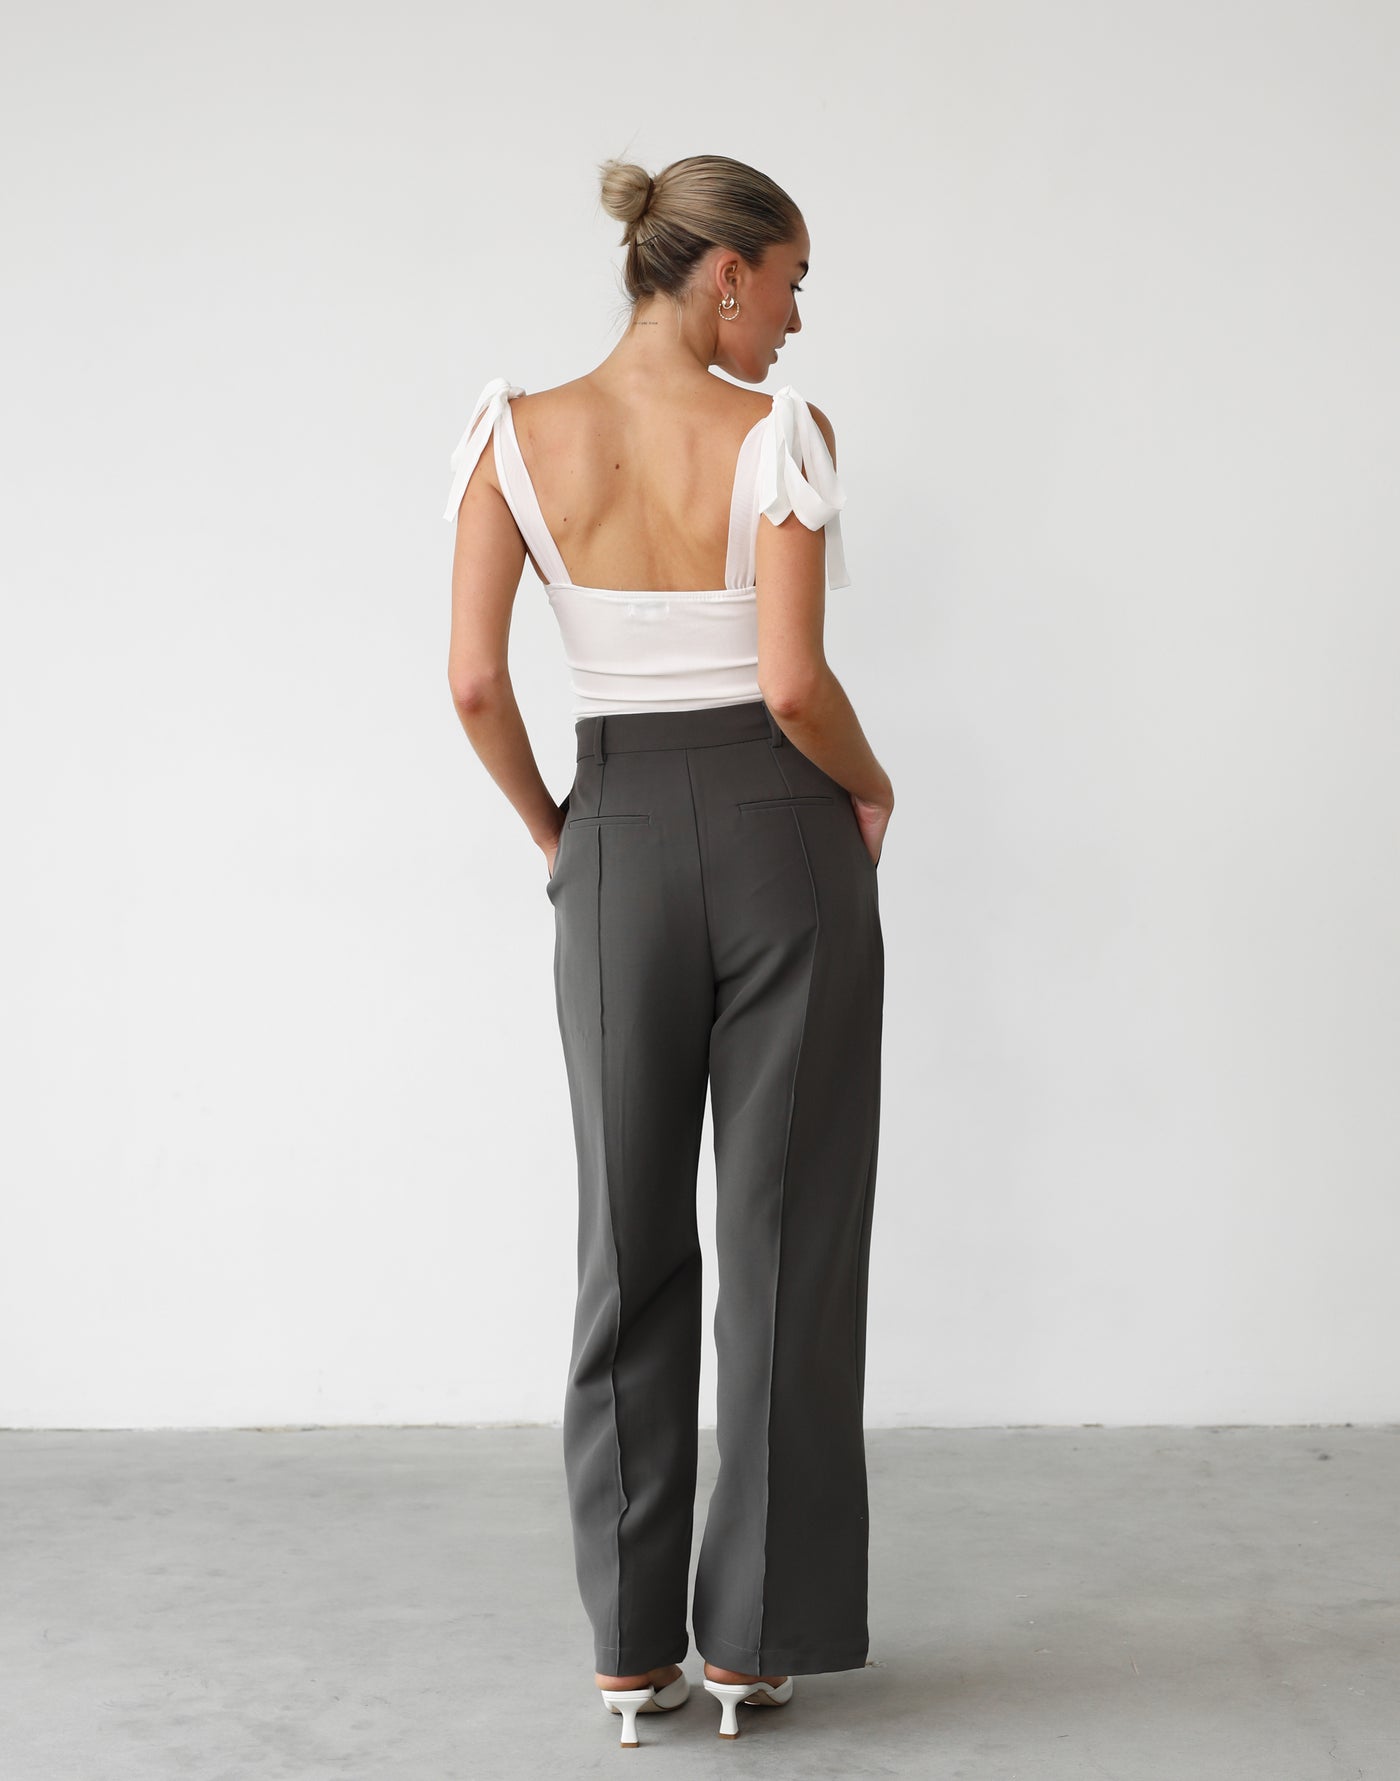 Colden Pants (Brown) - High Waisted Business Pant - Women's Pants - Charcoal Clothing